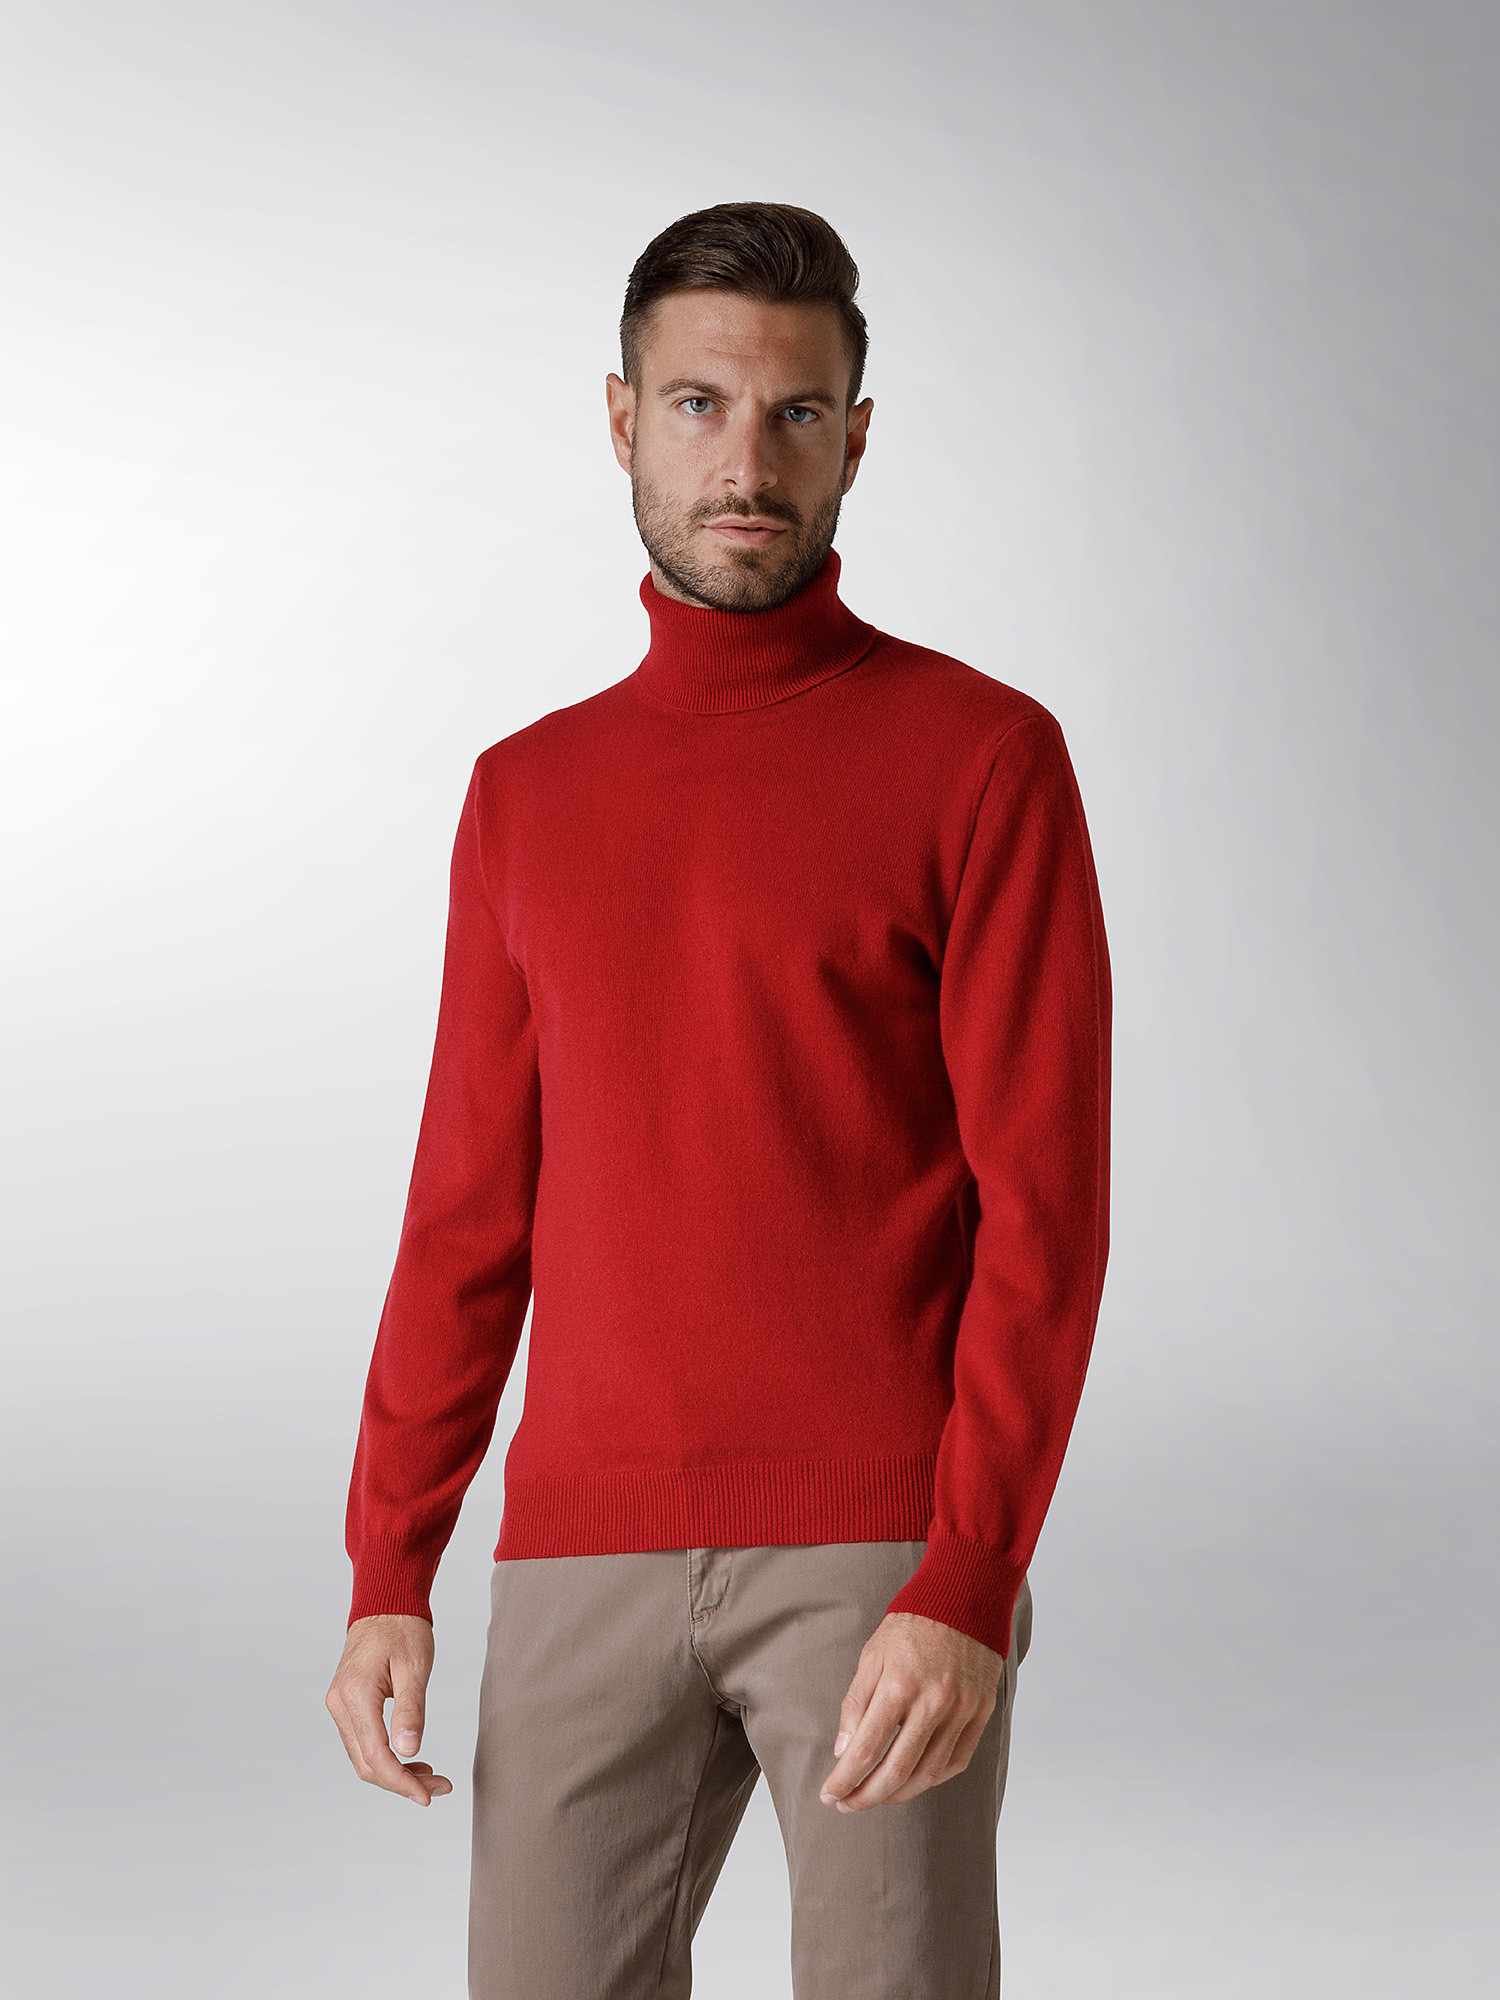 Coin Cashmere - Dolcevita in puro cashmere, Rosso, large image number 1